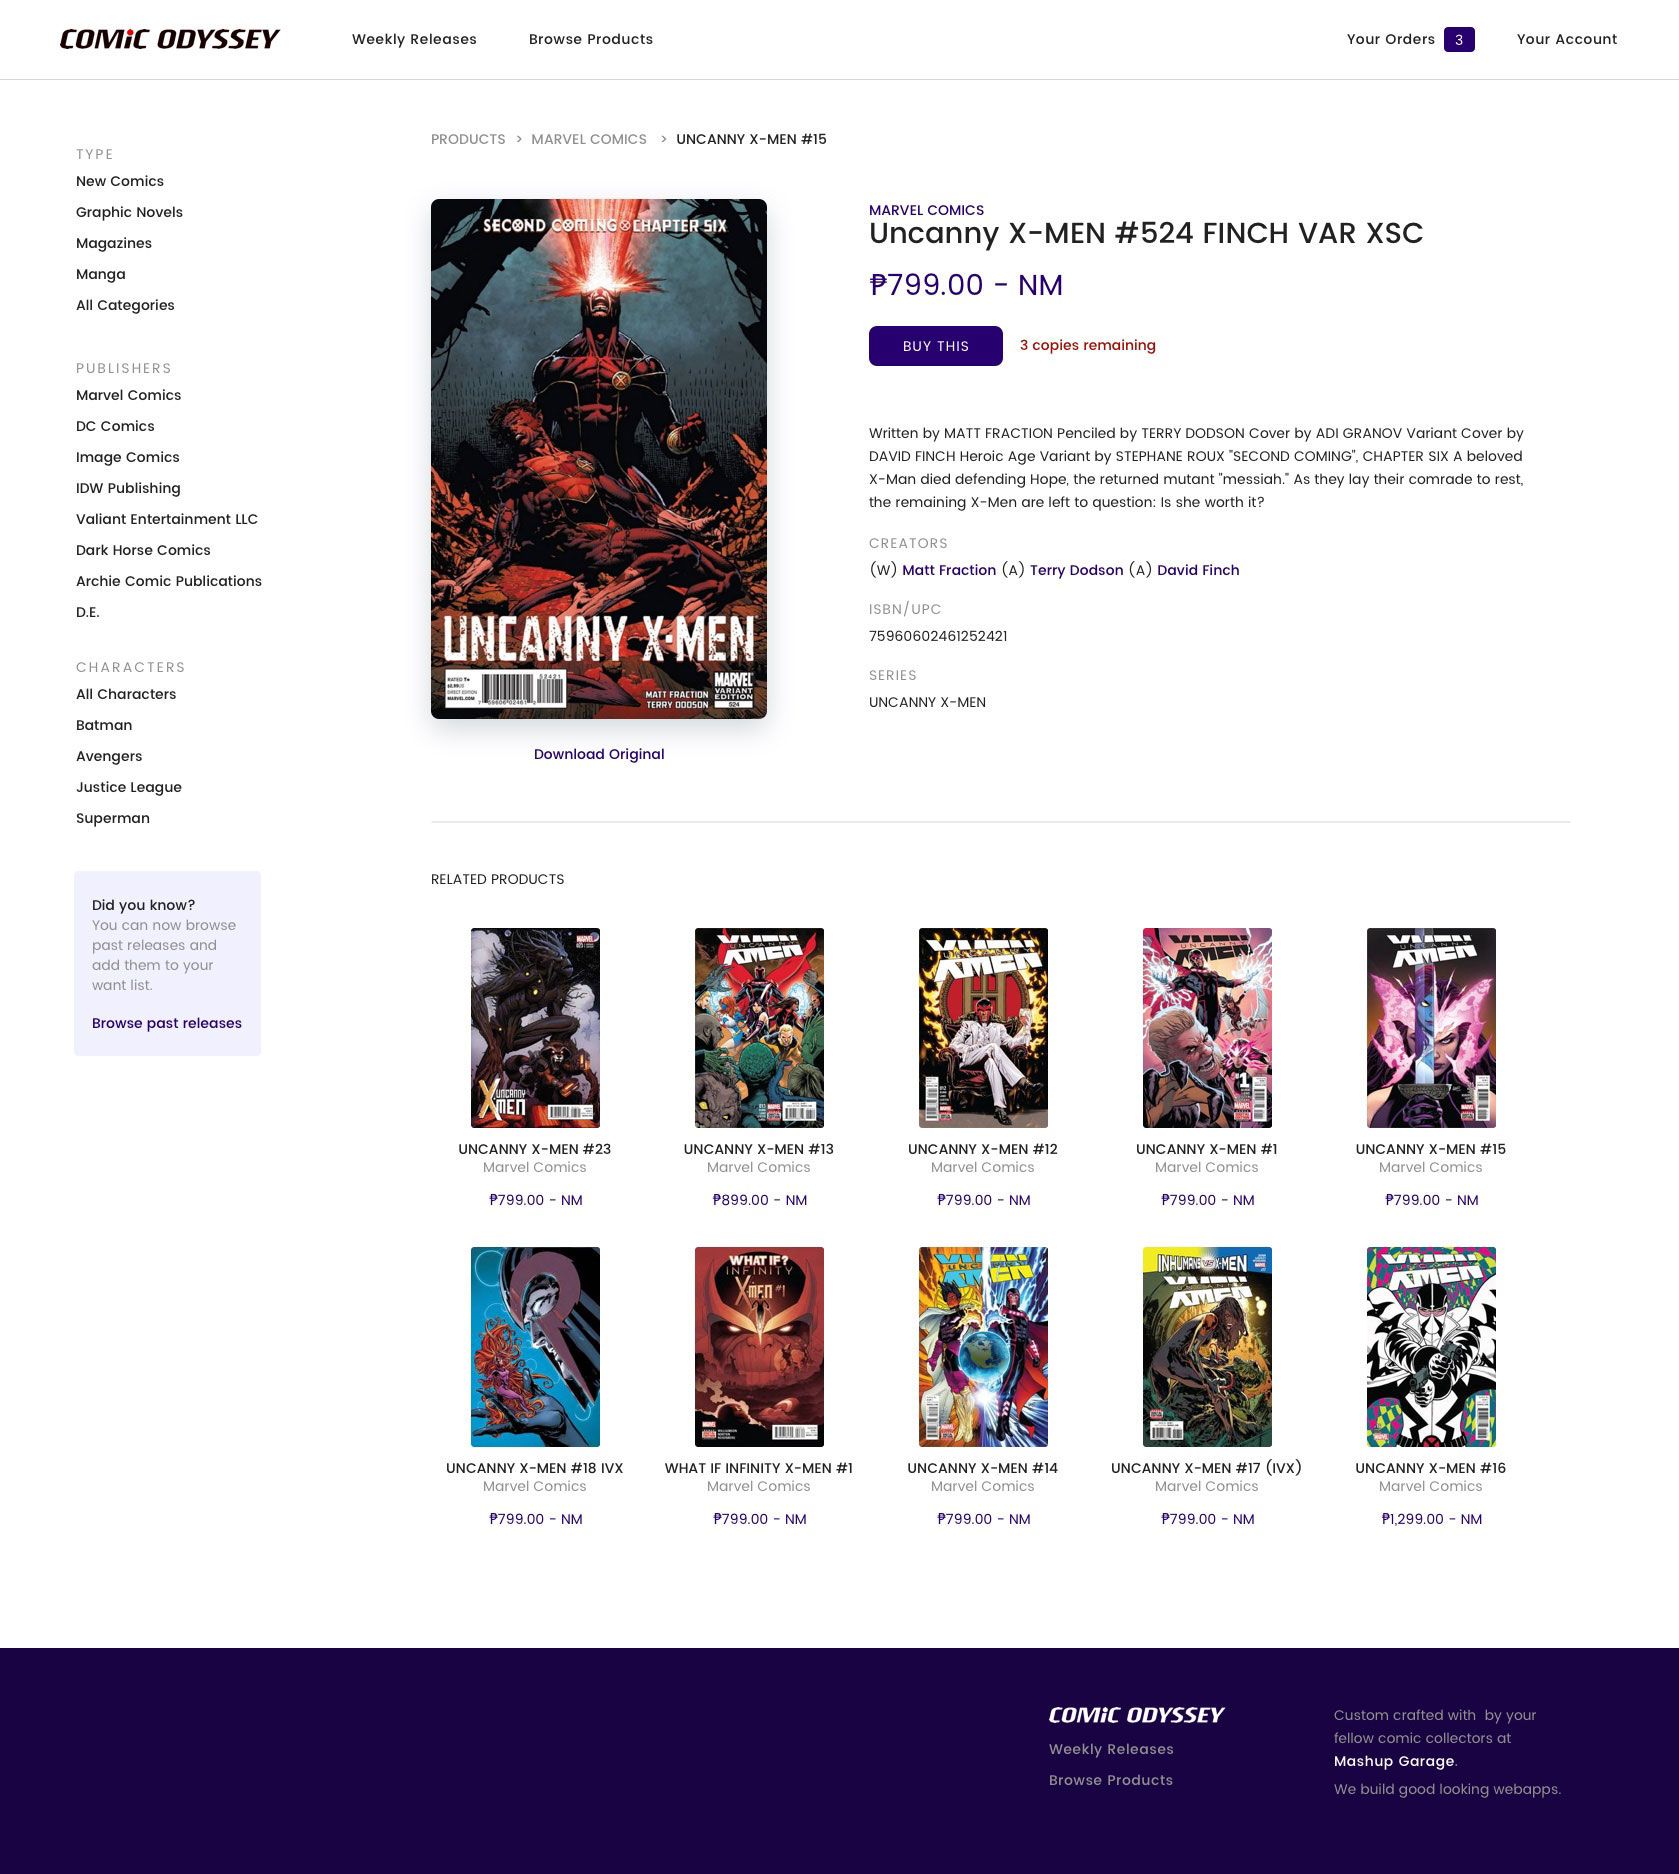 Comic Odyssey product page